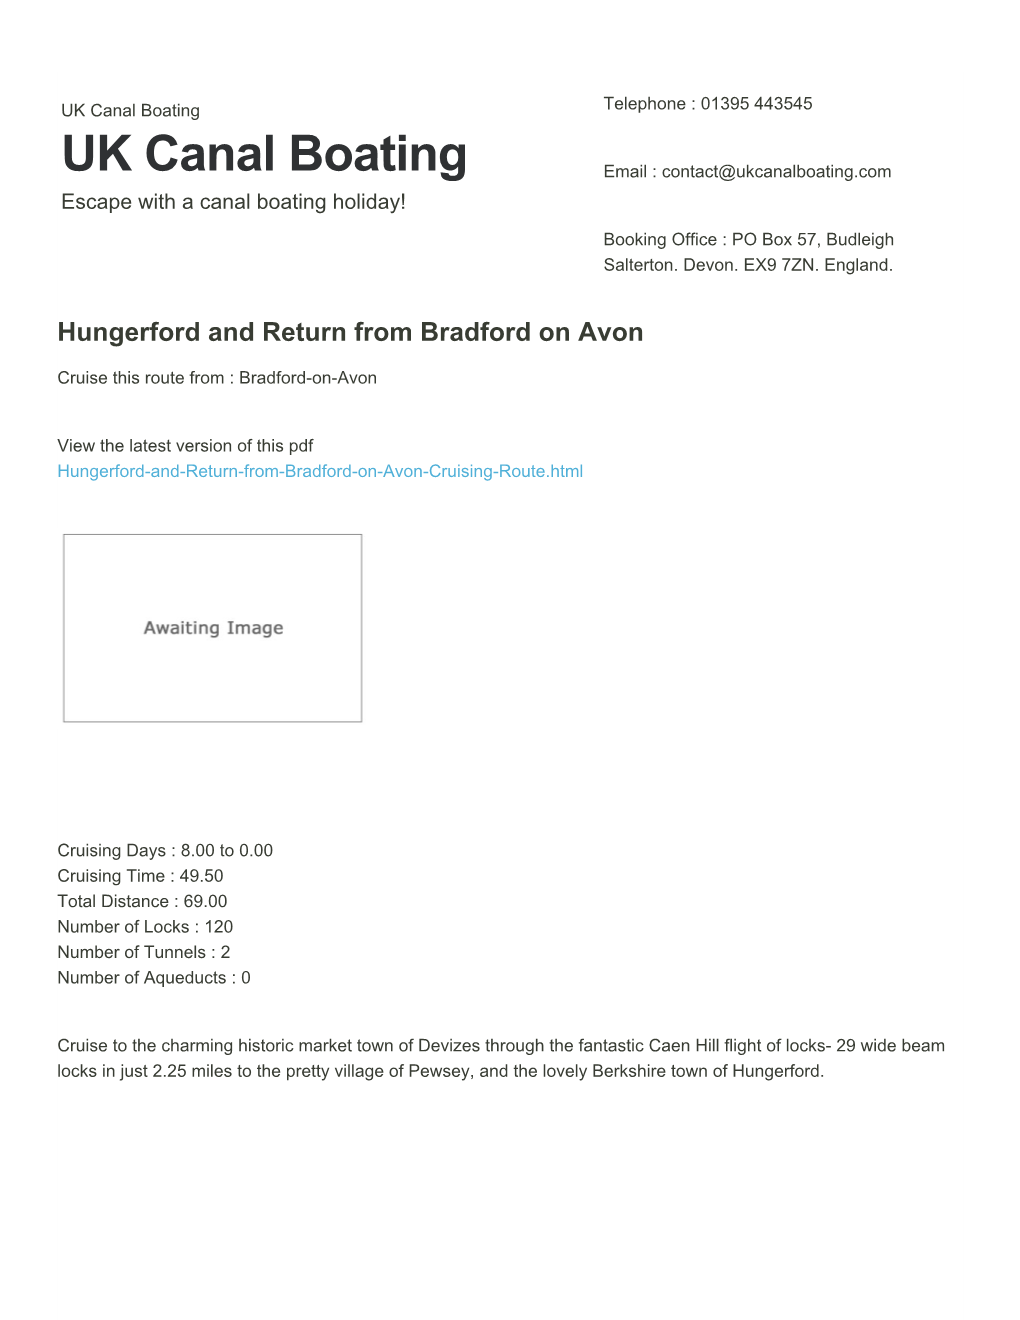 Hungerford and Return from Bradford on Avon | UK Canal Boating